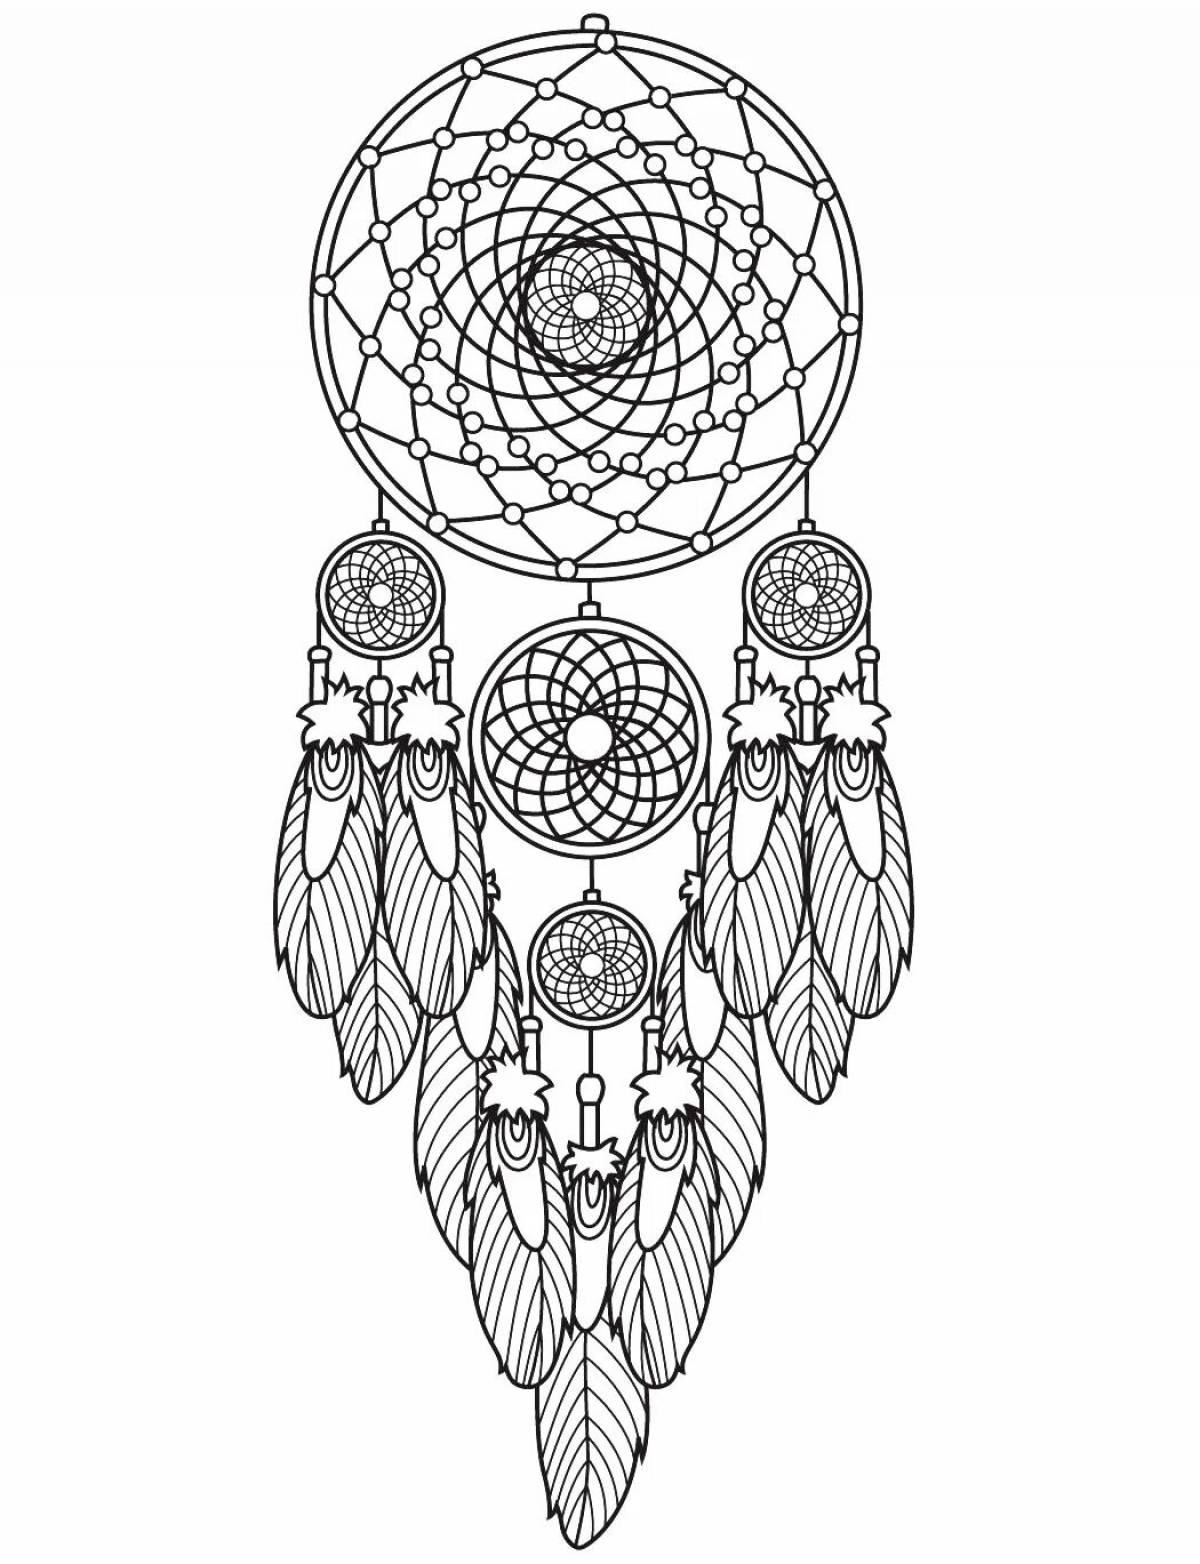 Exciting coloring book antistress dream catcher